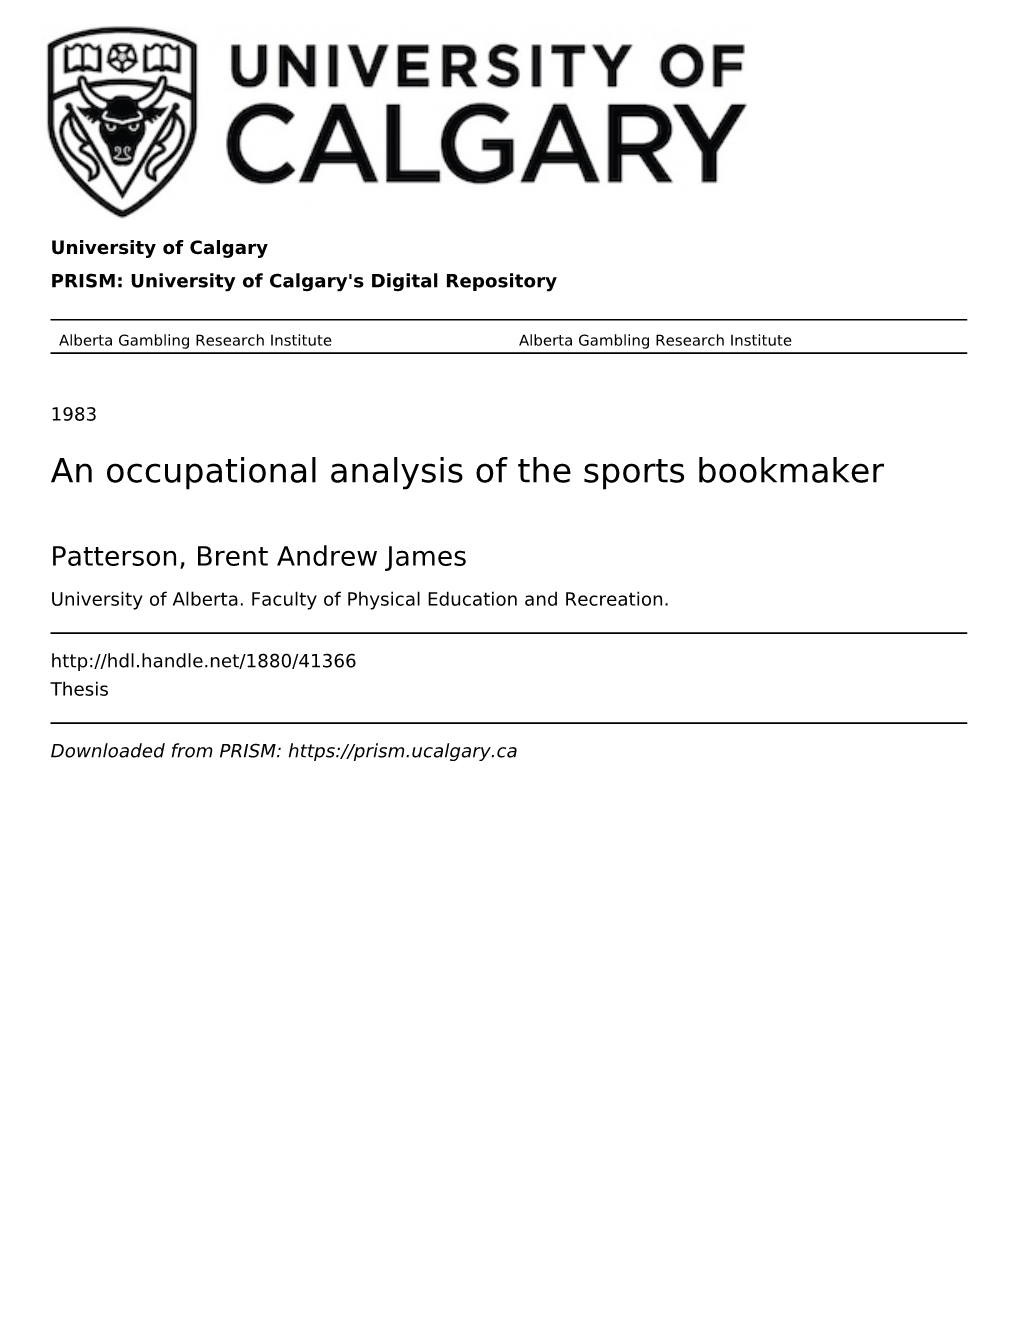 An Occupational Analysis of the Sports Bookmaker